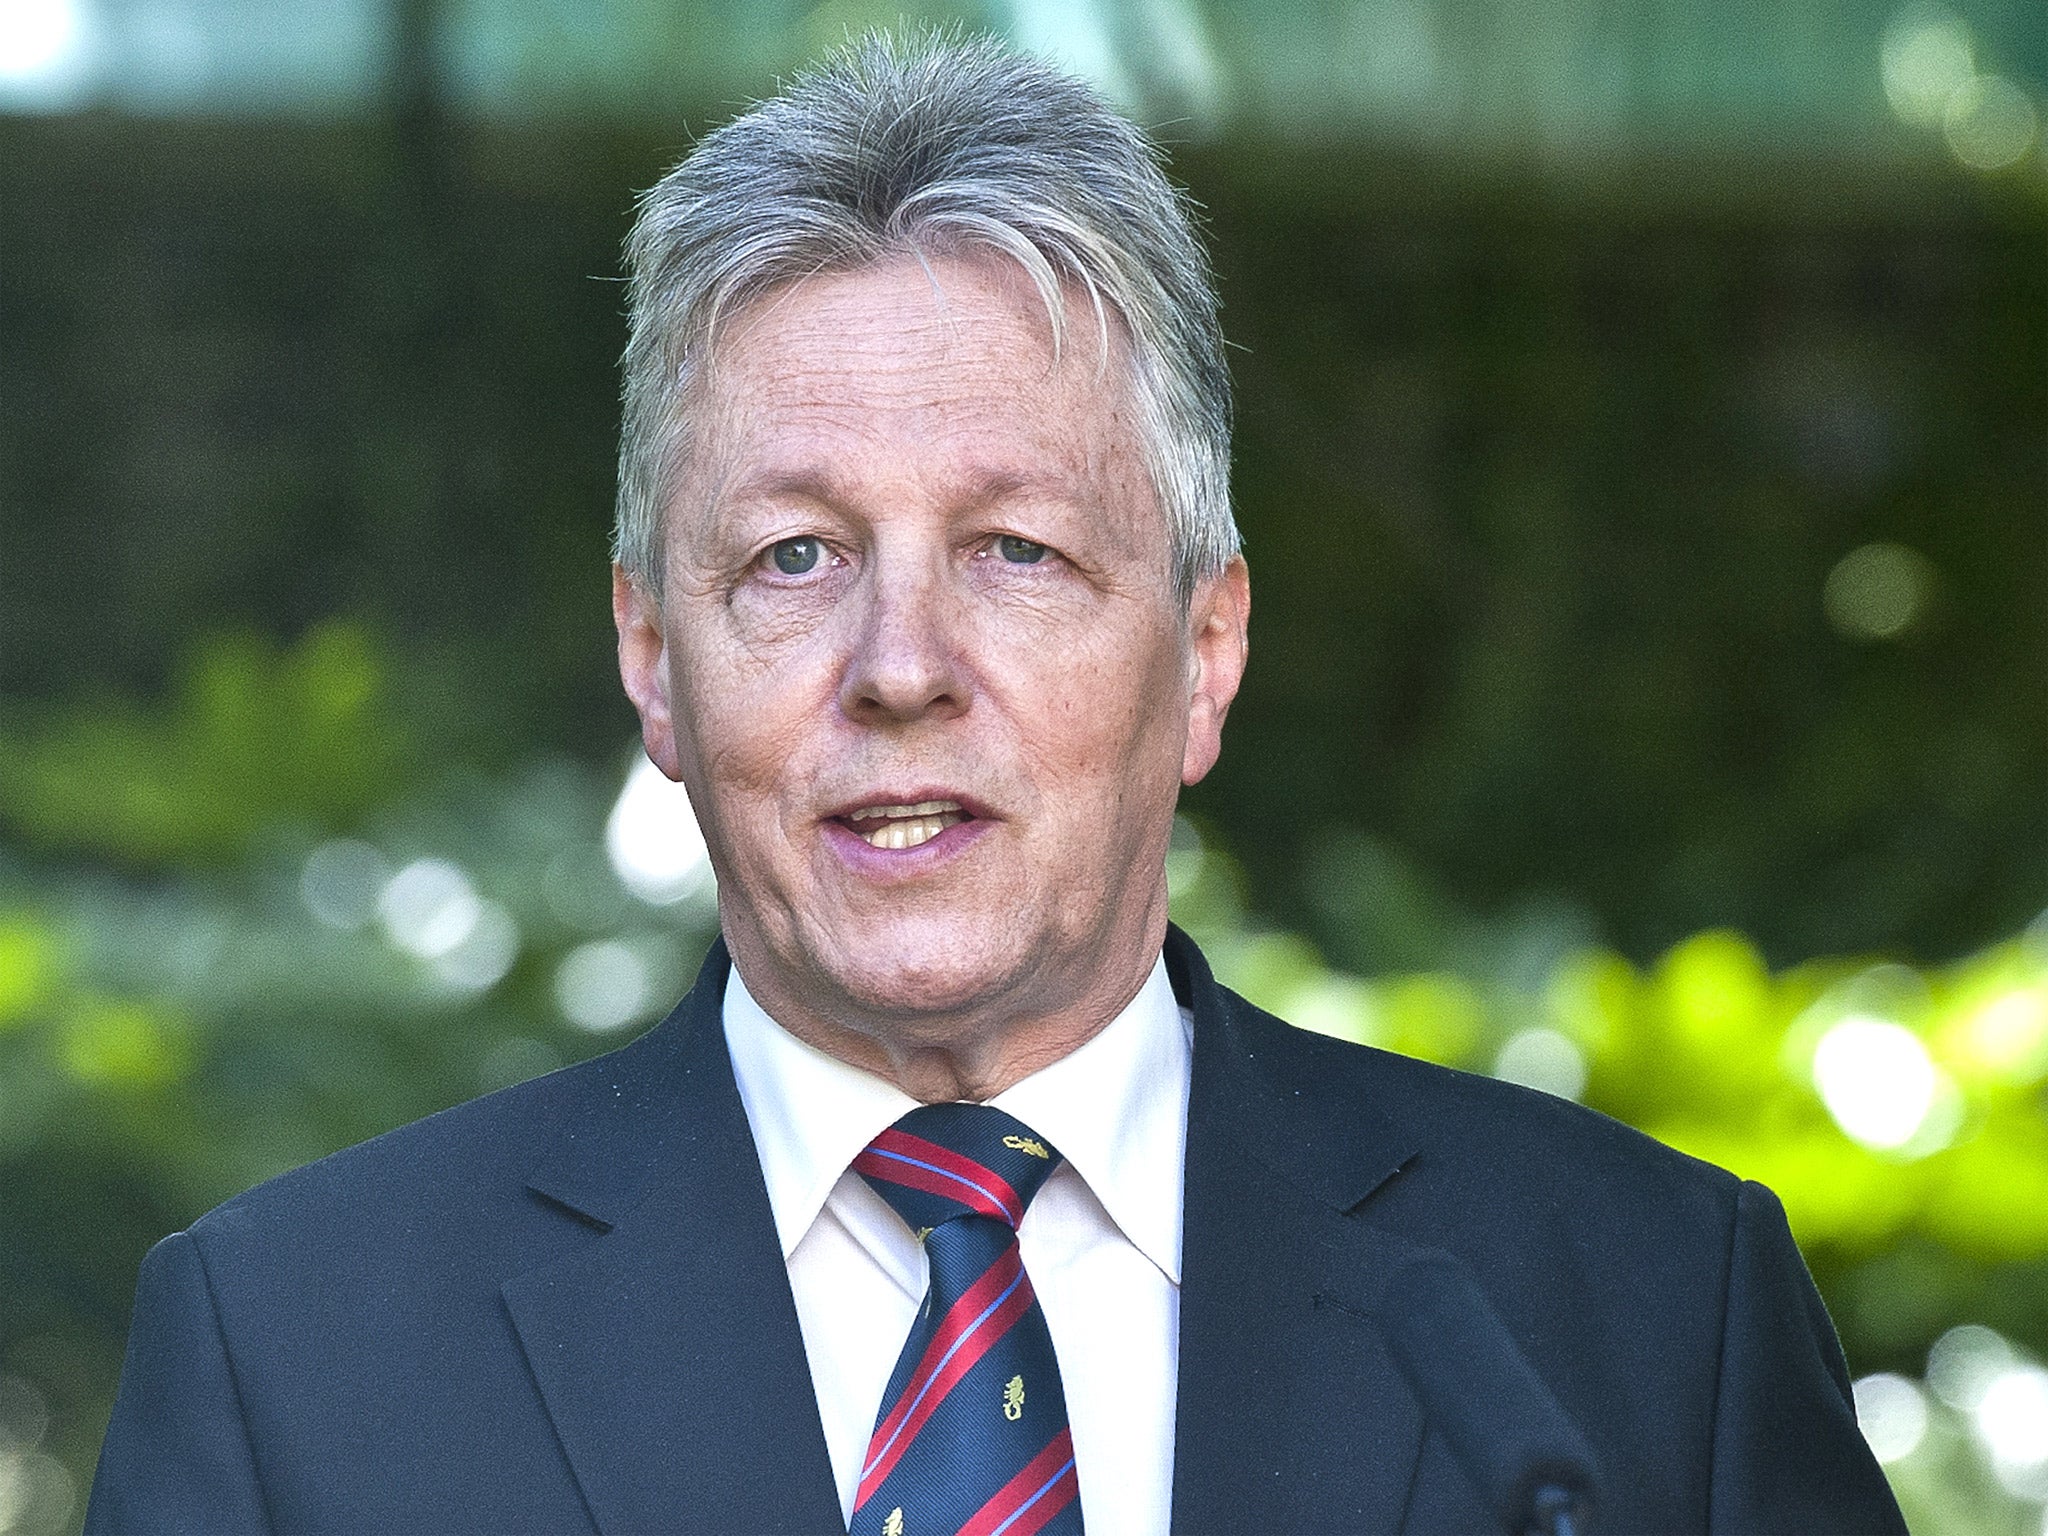 Peter Robinson said he felt ‘deceived’ by the Government